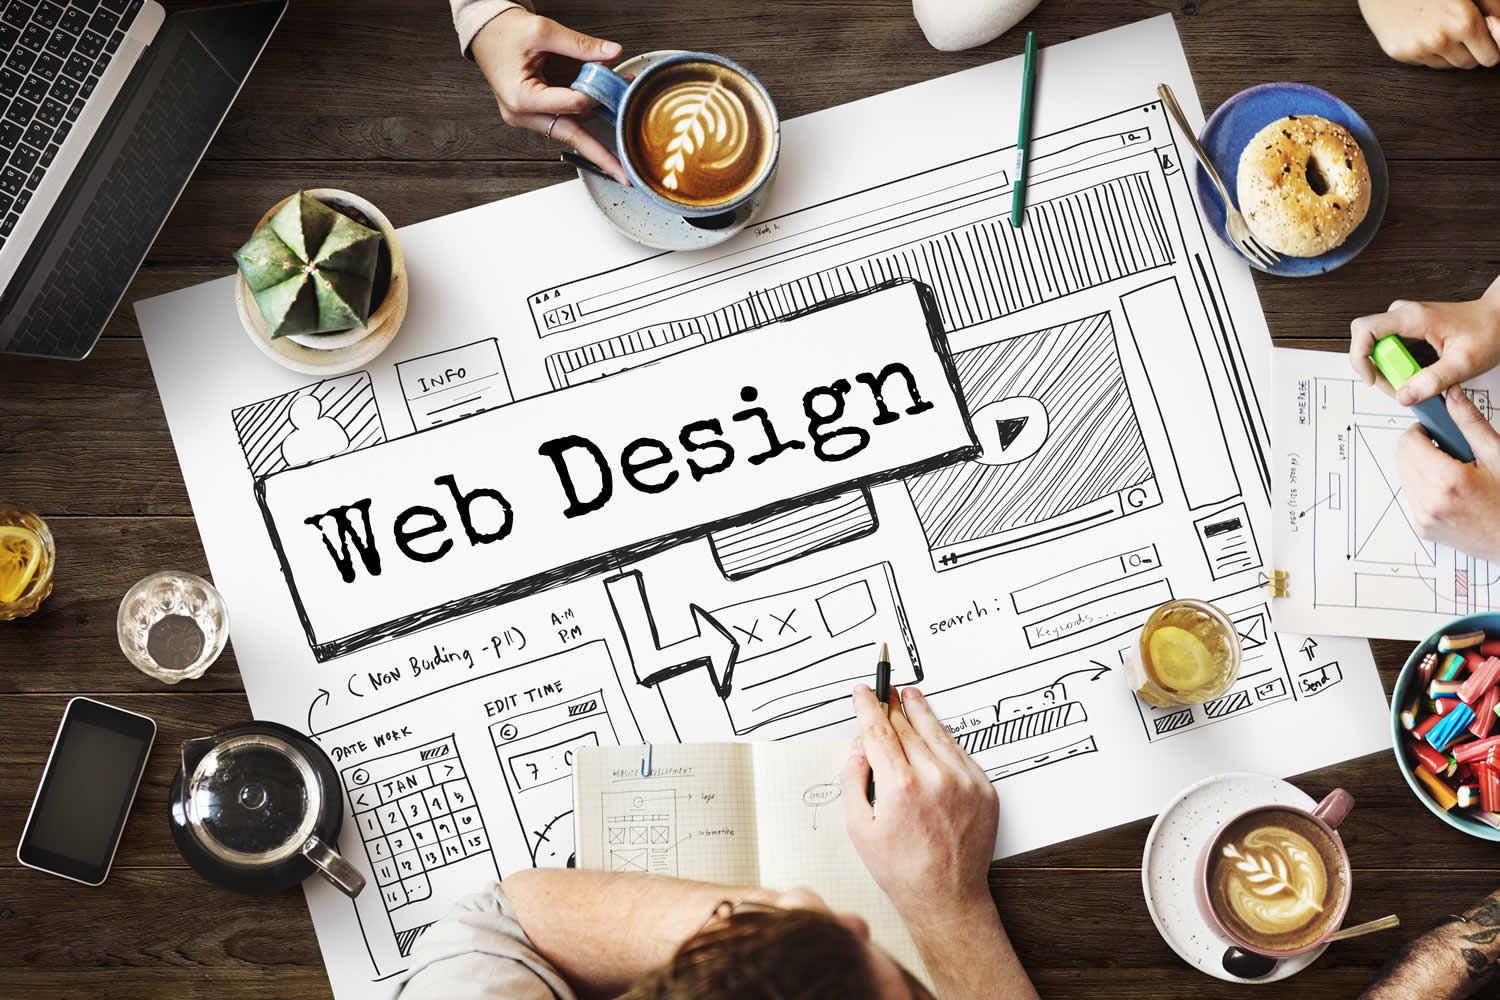 A design used for planning your website project